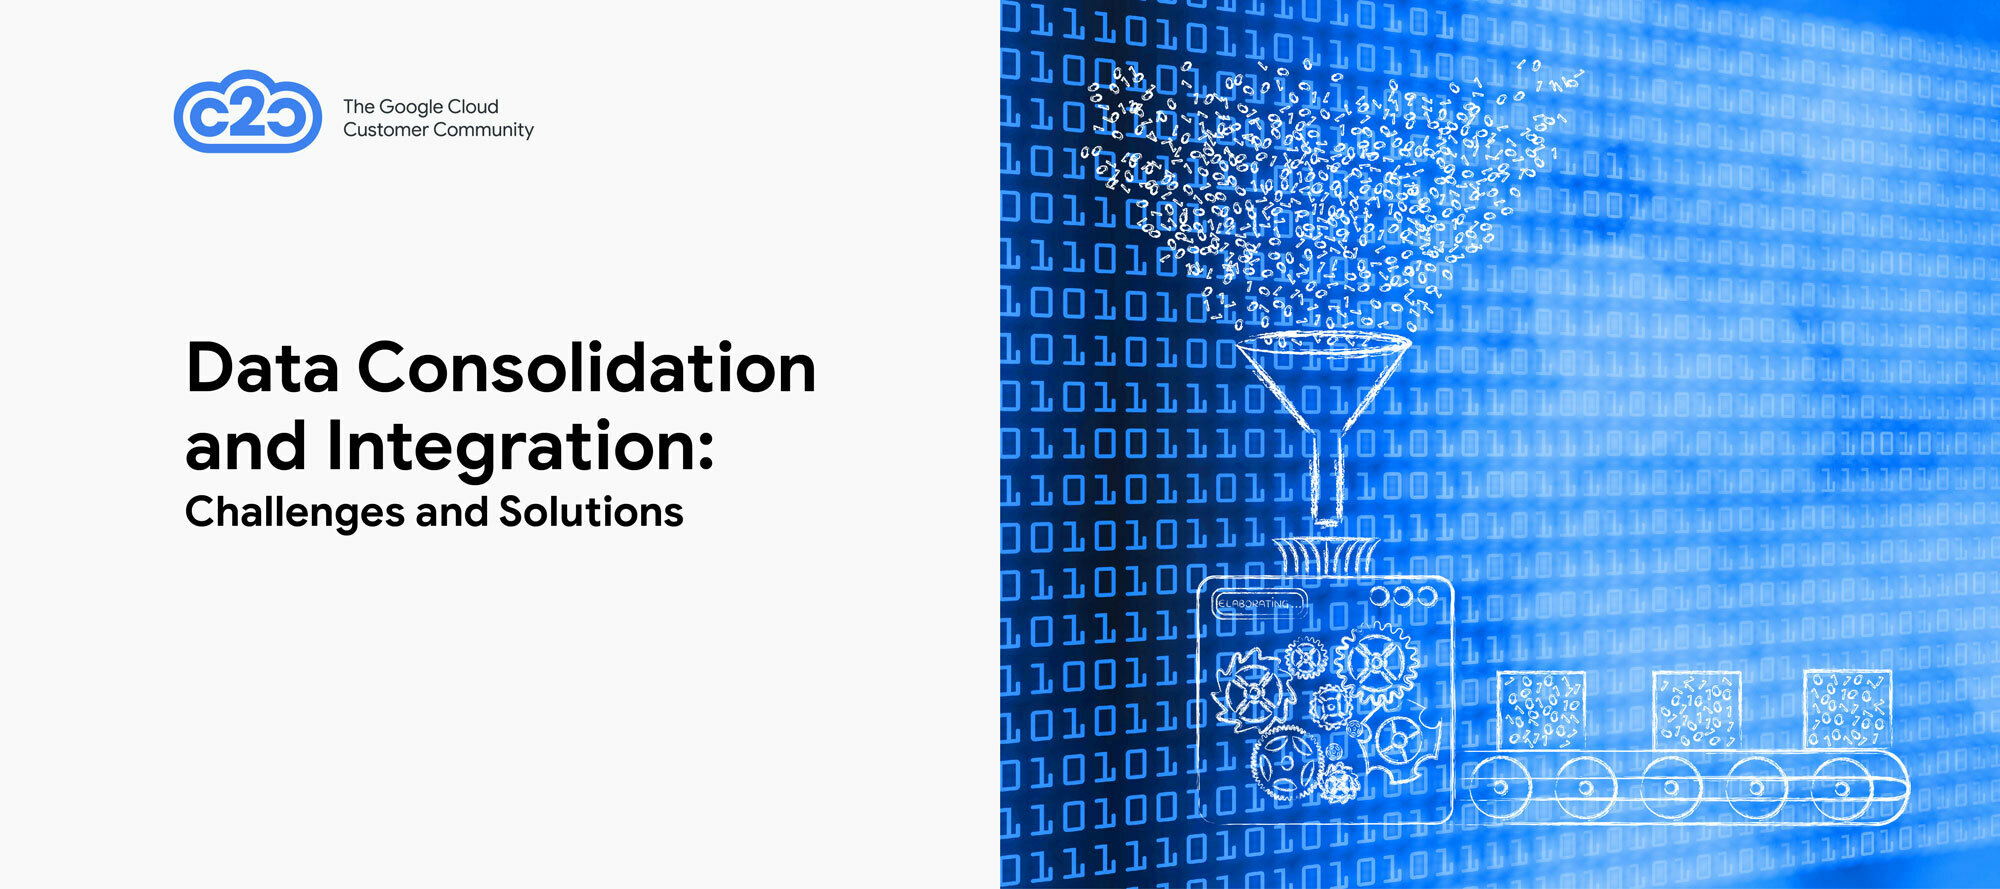 Data Consolidation and Integration: Challenges and Solutions